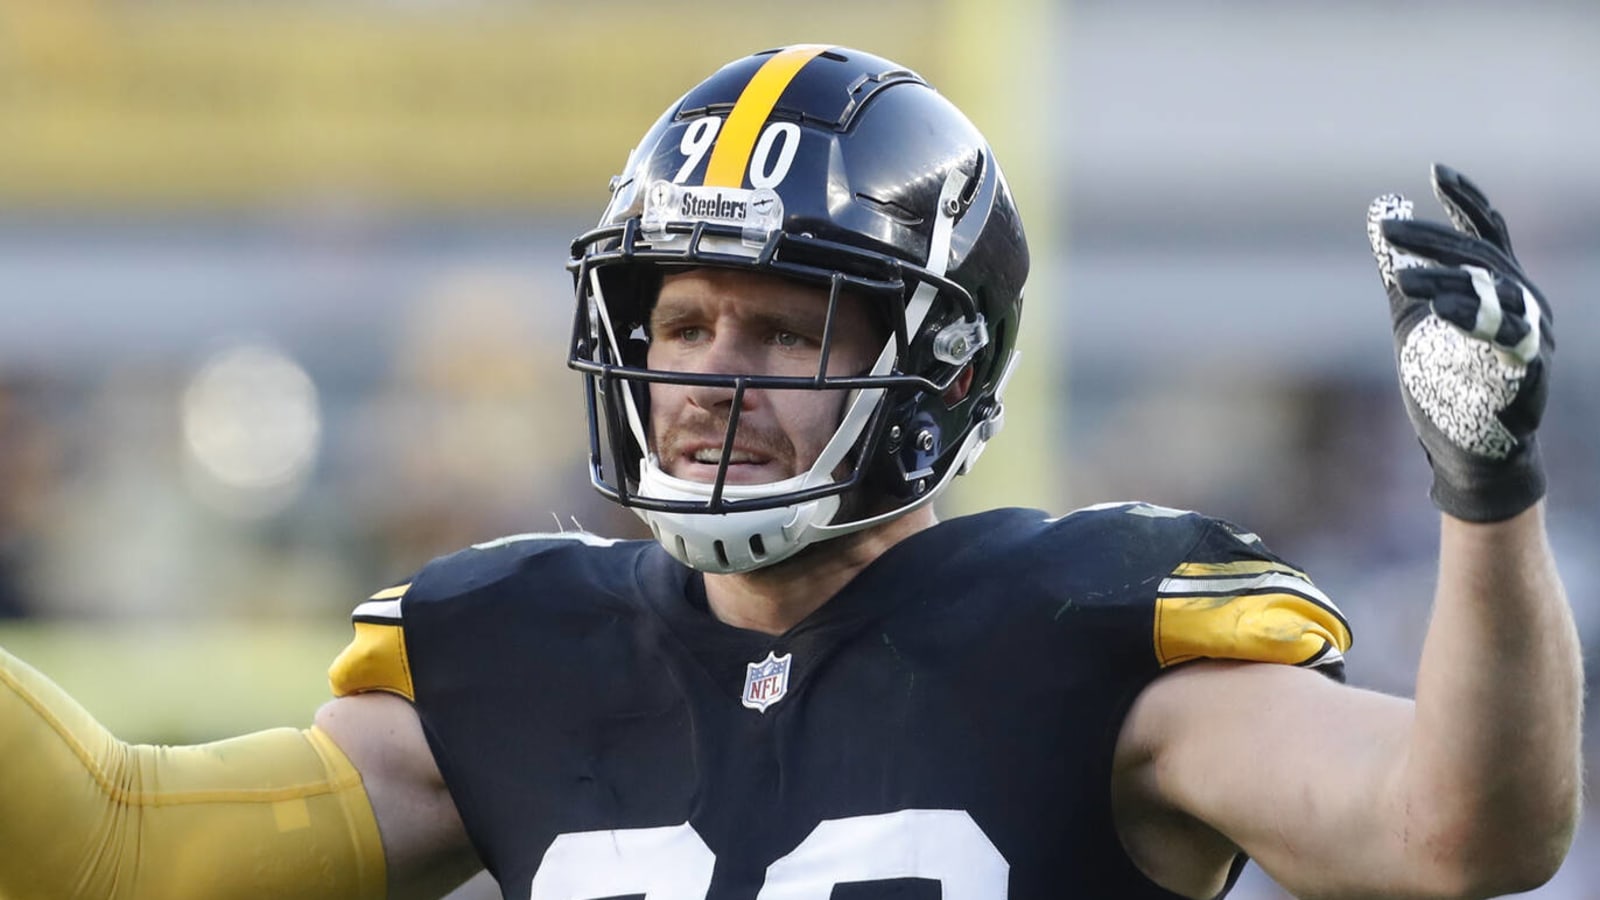 Will Steelers be punished for T.J. Watt's controversial return to play?